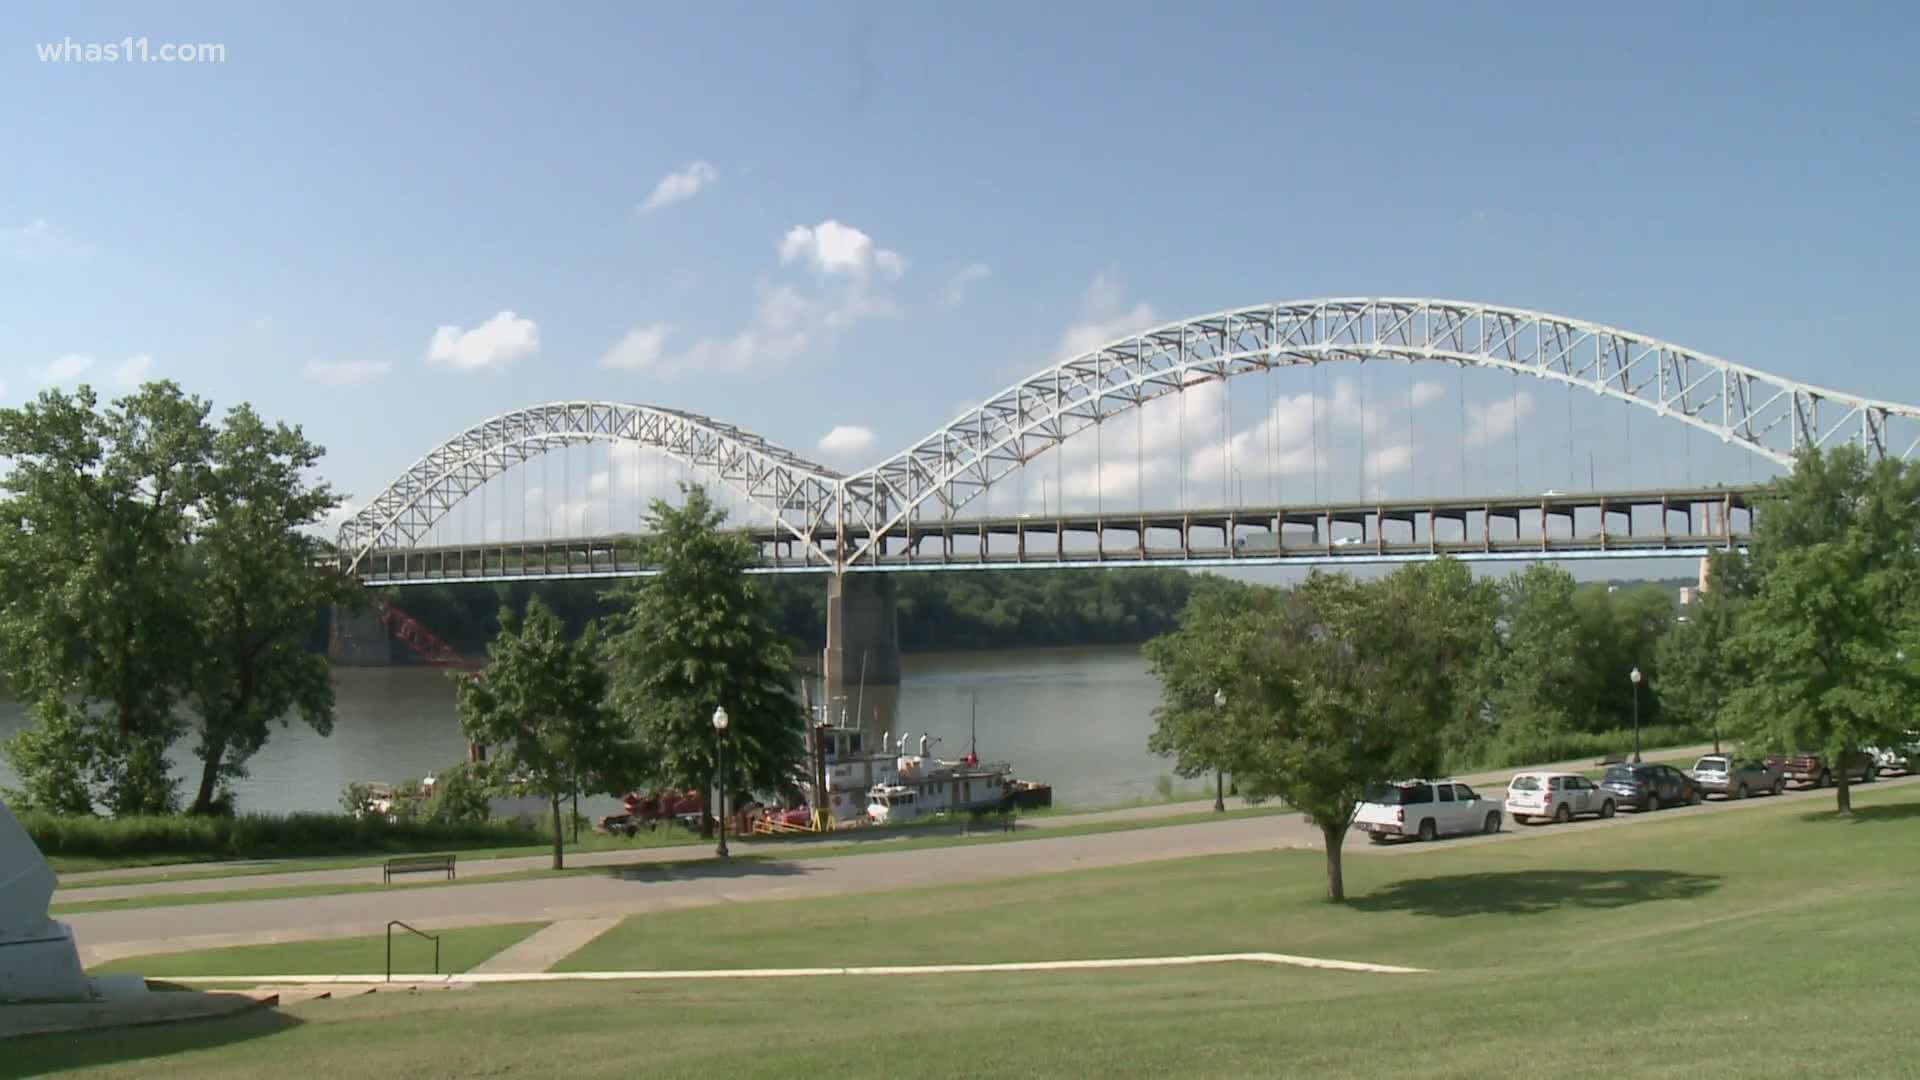 Could tolls across the river be waived? That's what some leaders are pushing for, asking INDOT to waive fees on toll fees on three bridges connecting the two states.